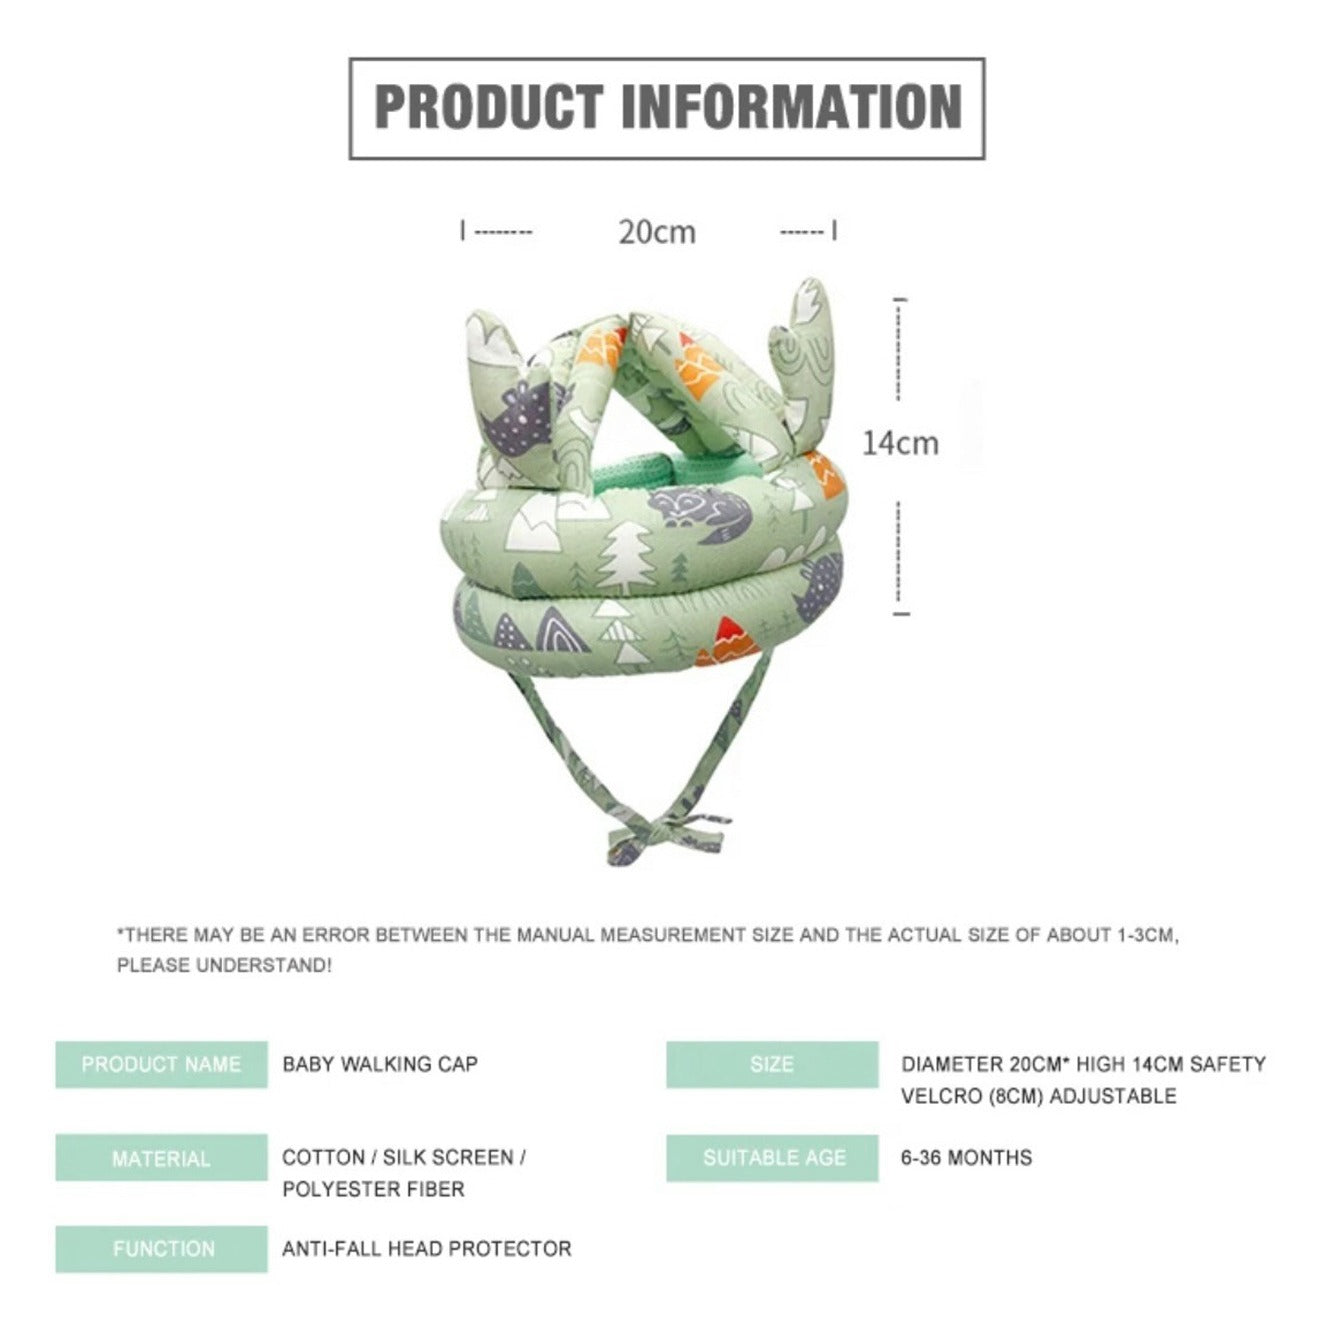 Displaying the information about Baby Walking Cap along with size